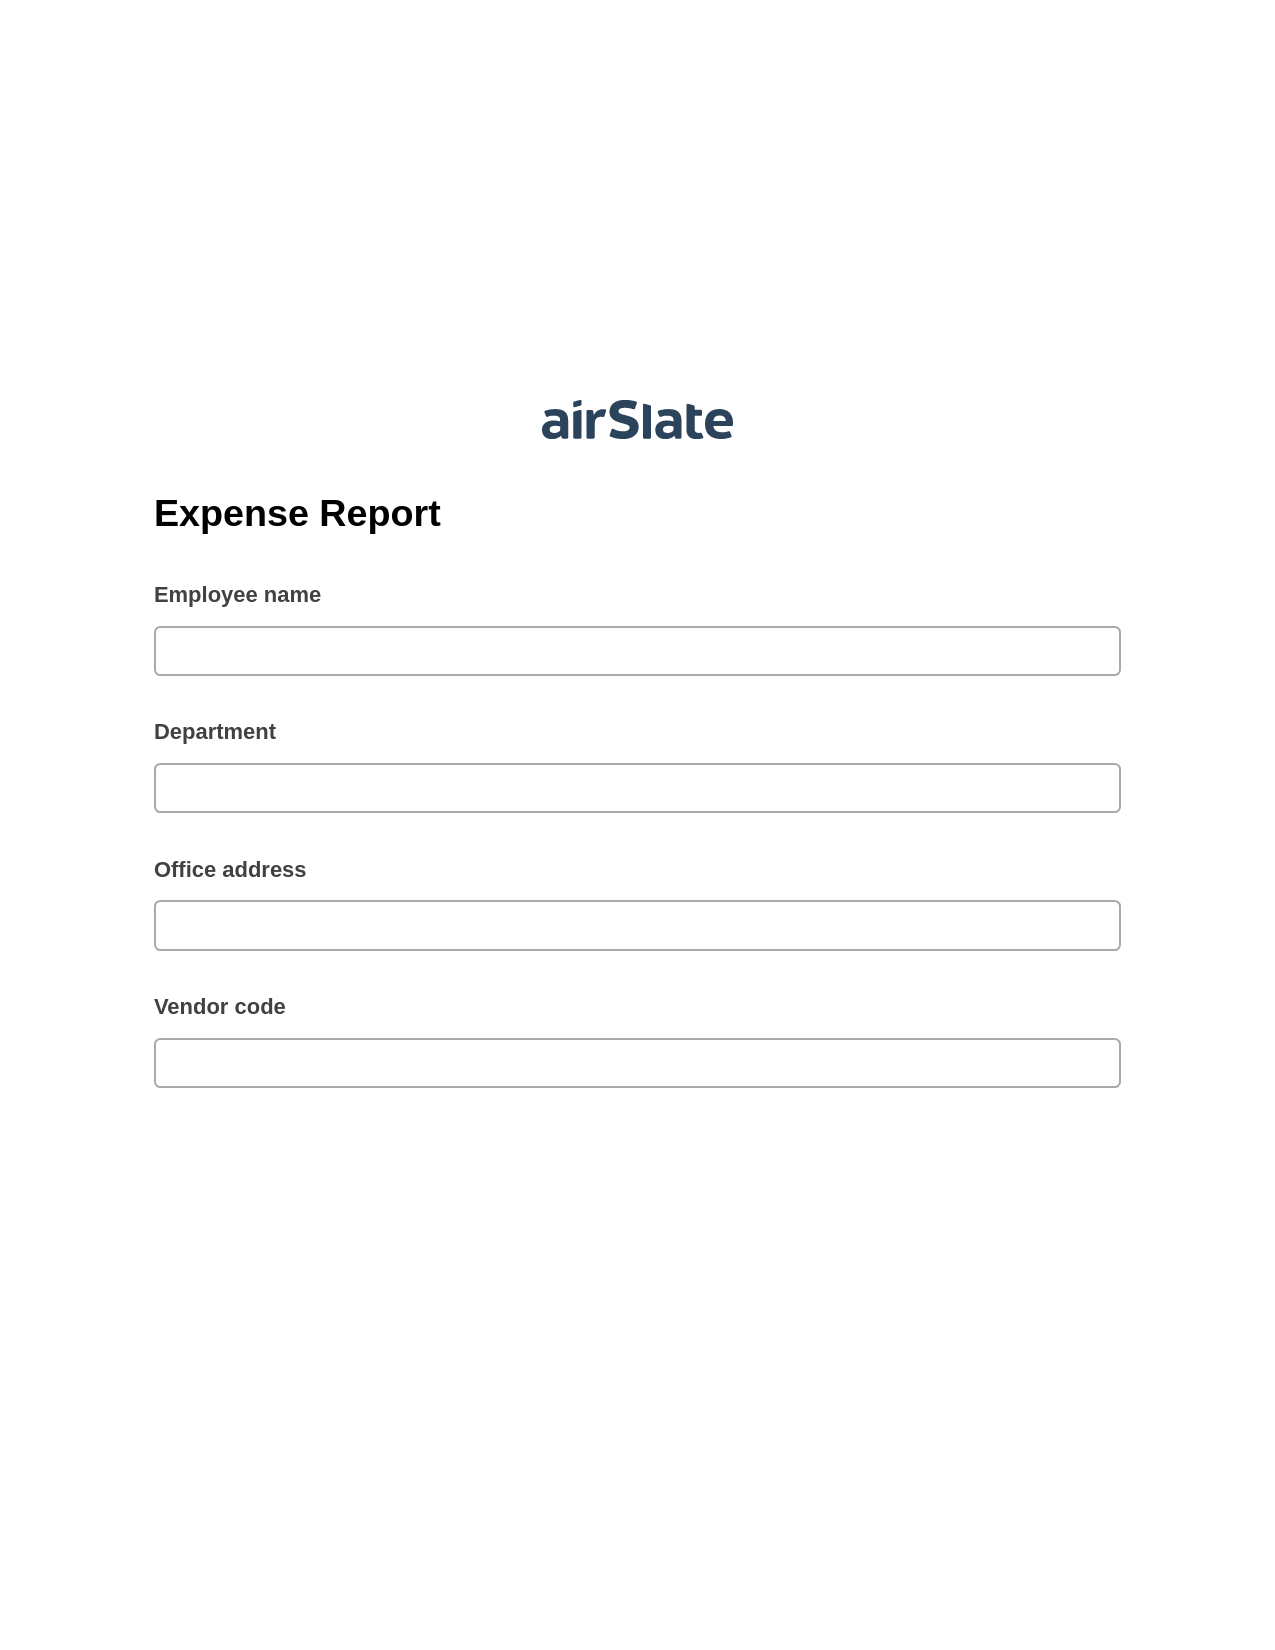 Multirole Expense Report Pre-fill from NetSuite Records Bot, Hide Signatures Bot, Export to NetSuite Record Bot